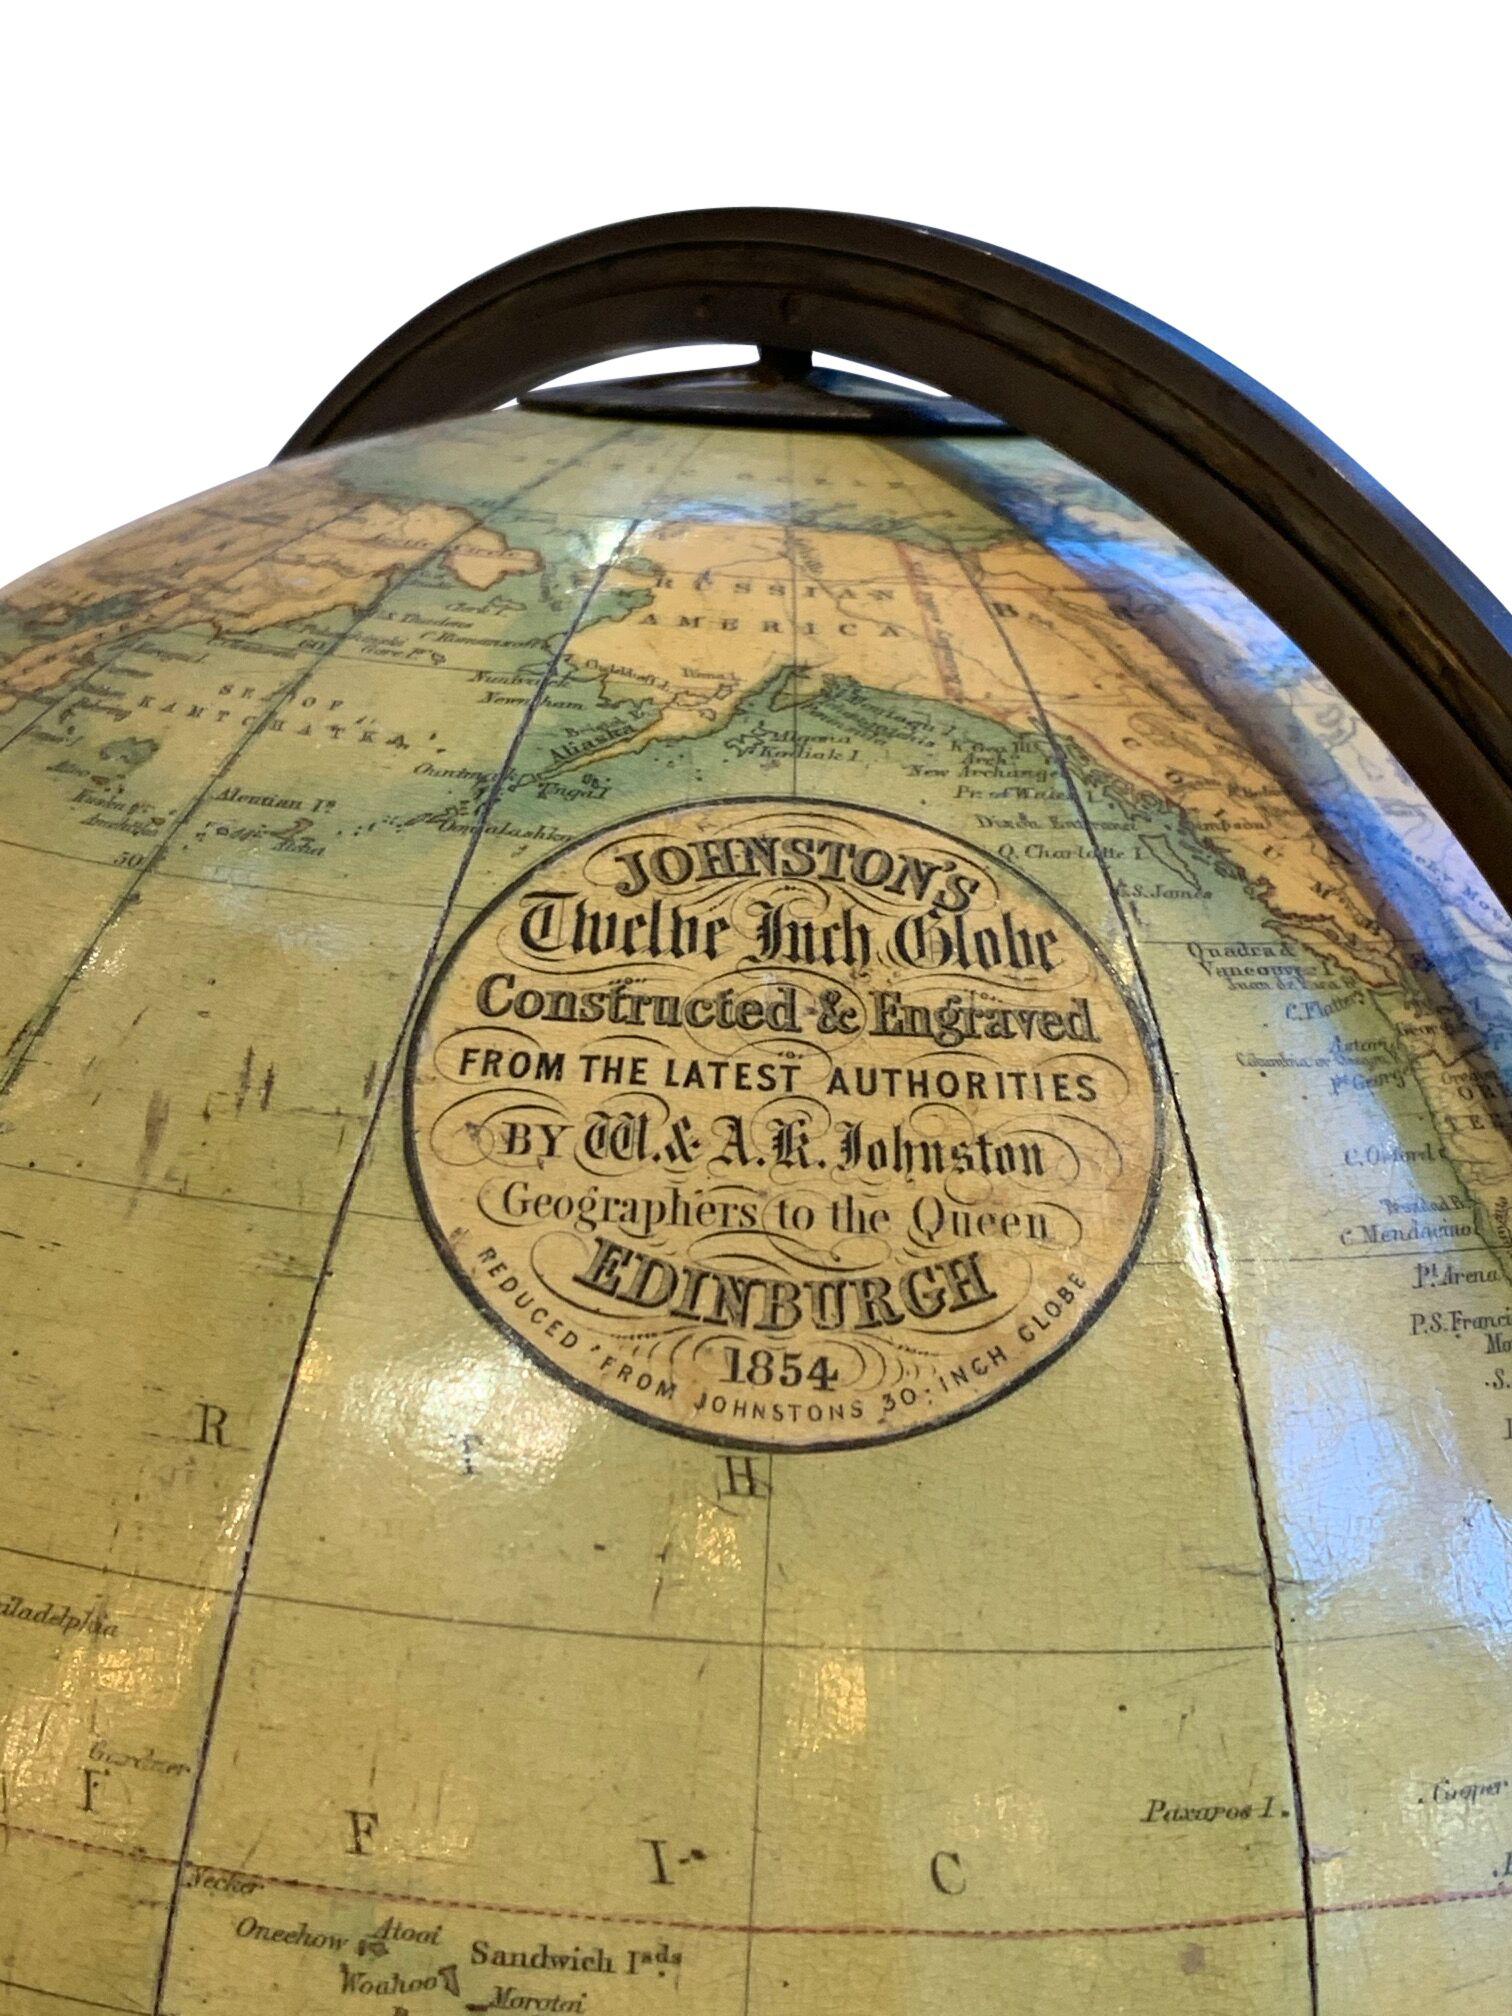 A 19th century terrestrial globe by W. & A.K. Johnson LTD. William Johnson (1802-1888) and Andrew Keith Johnson (1804-1871) founded and published globes in Edinburg, Scotland, since 1828. This is a very impressive 12th globe in excellent condition,